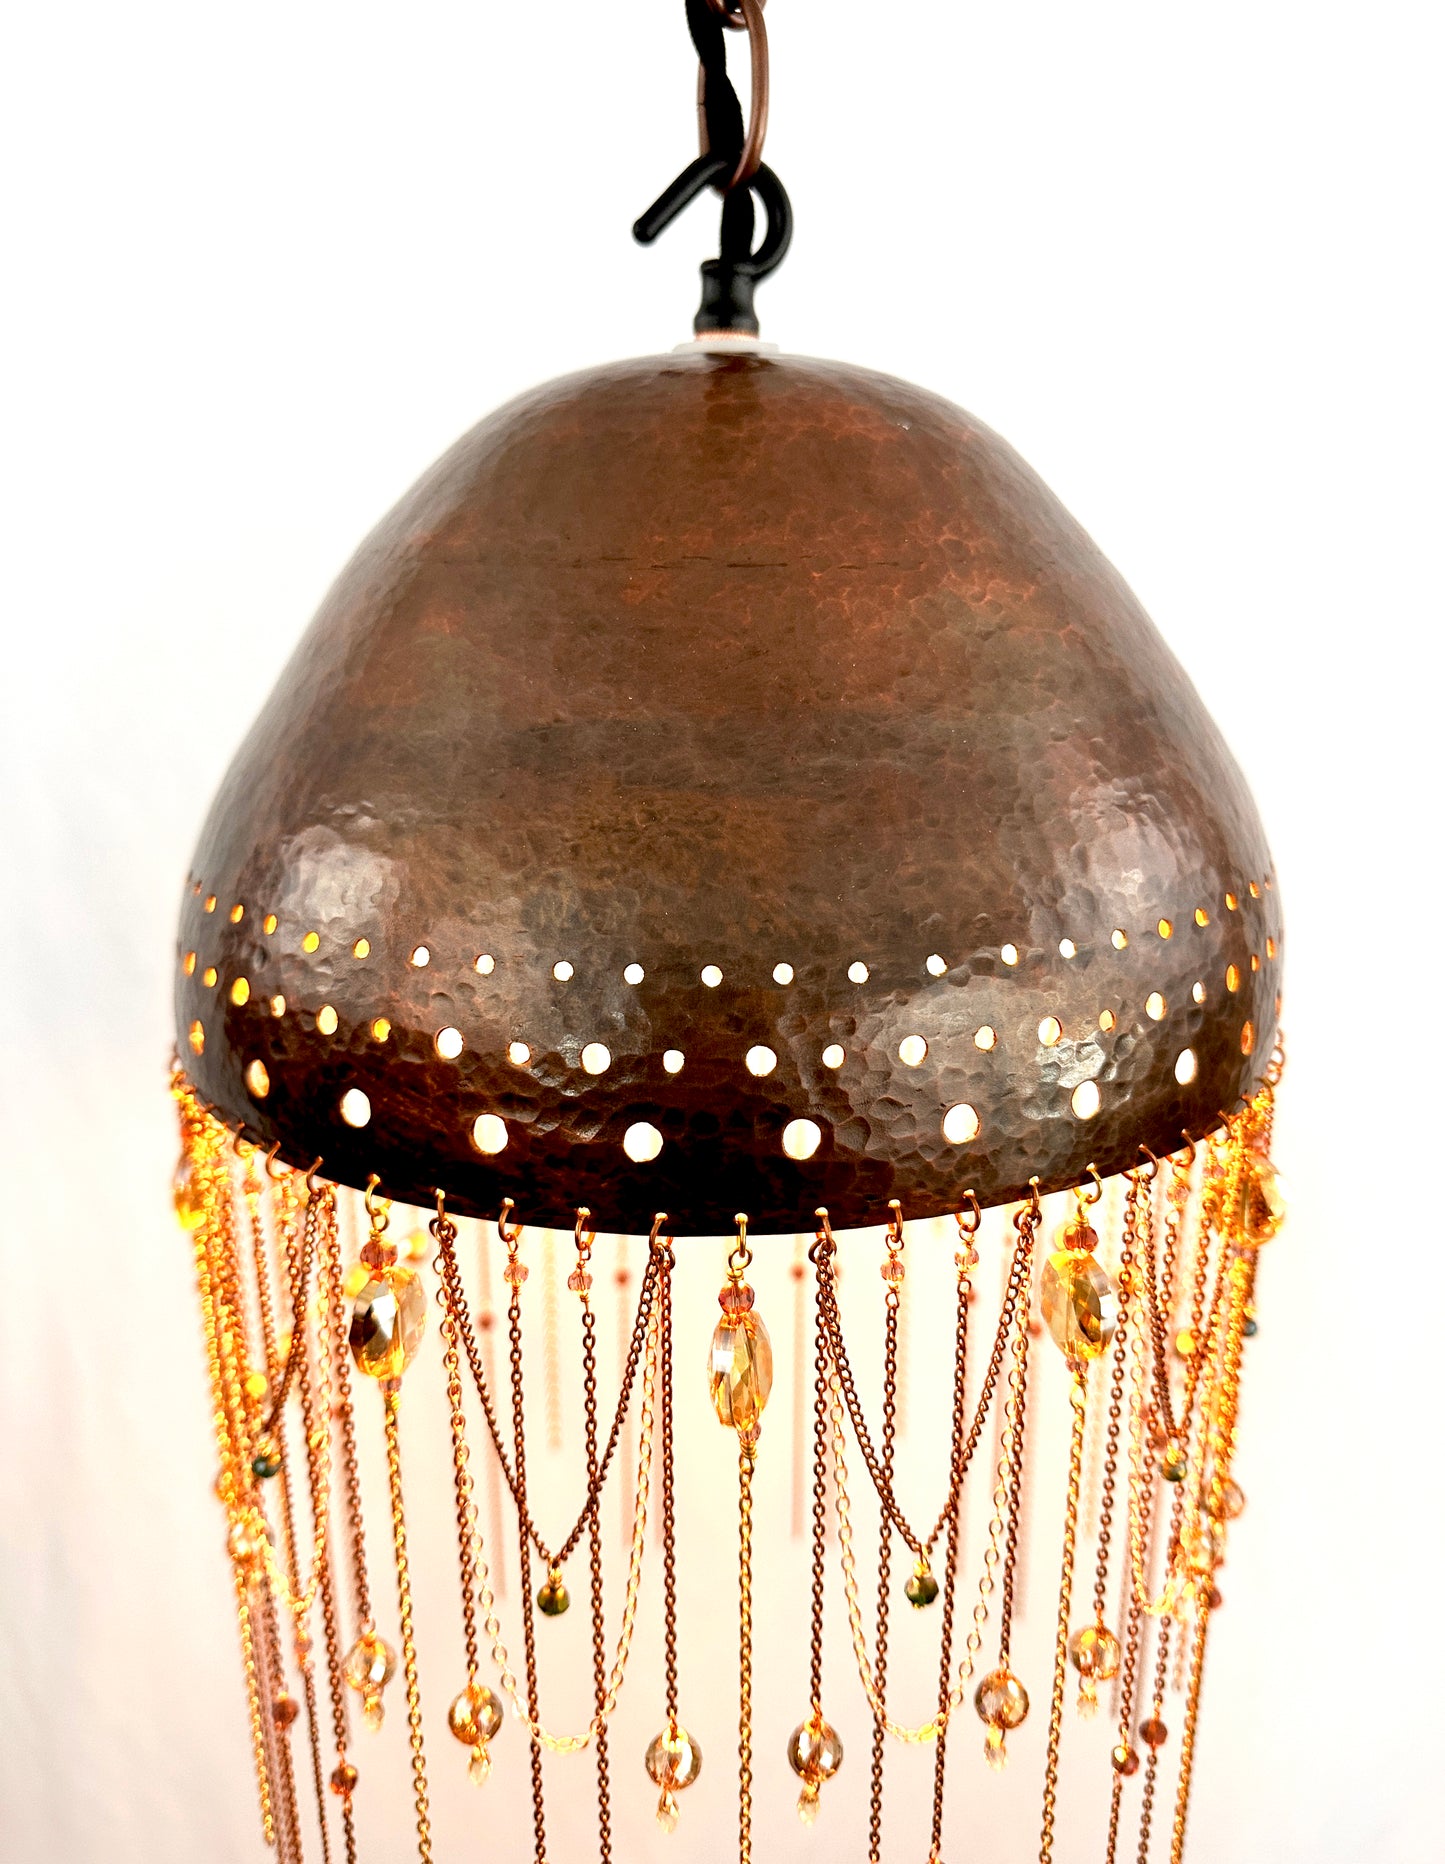 Red-Brown Shadow-Casting Crystal Pendant Lamp